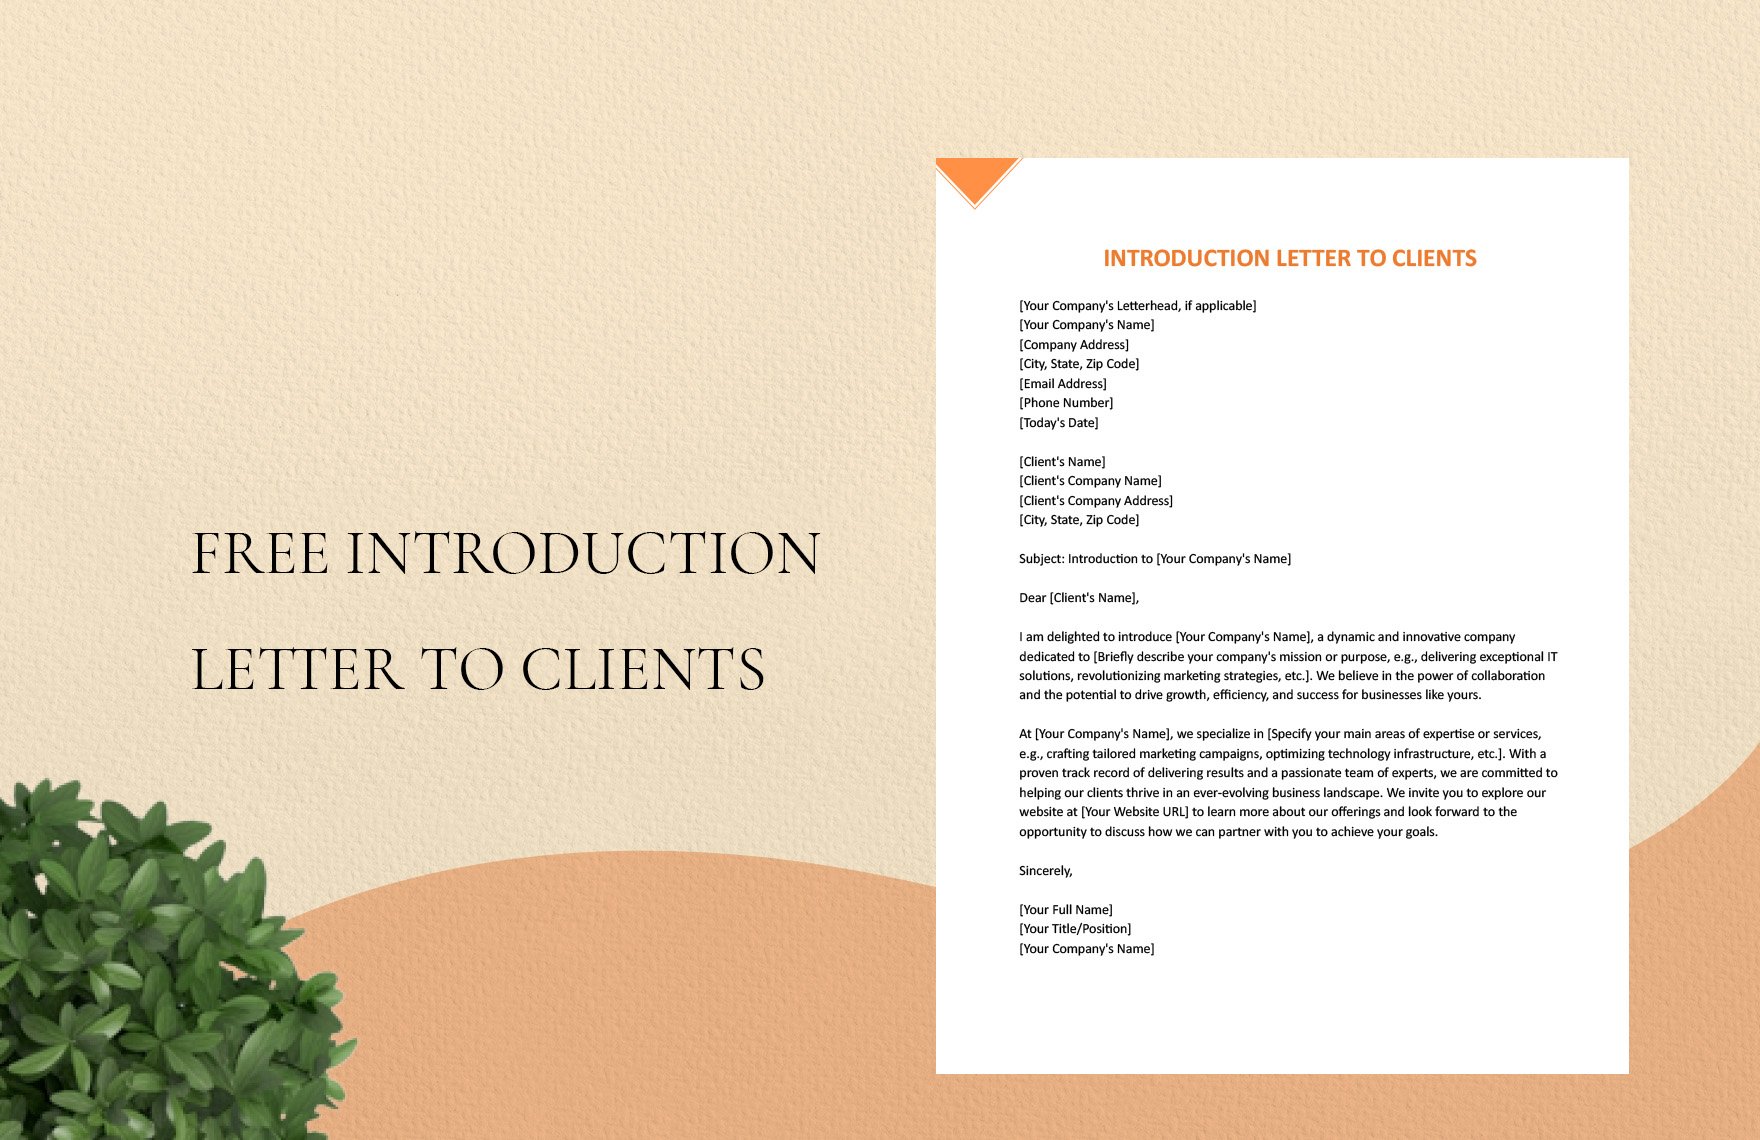 Free Introduction Letter To Clients